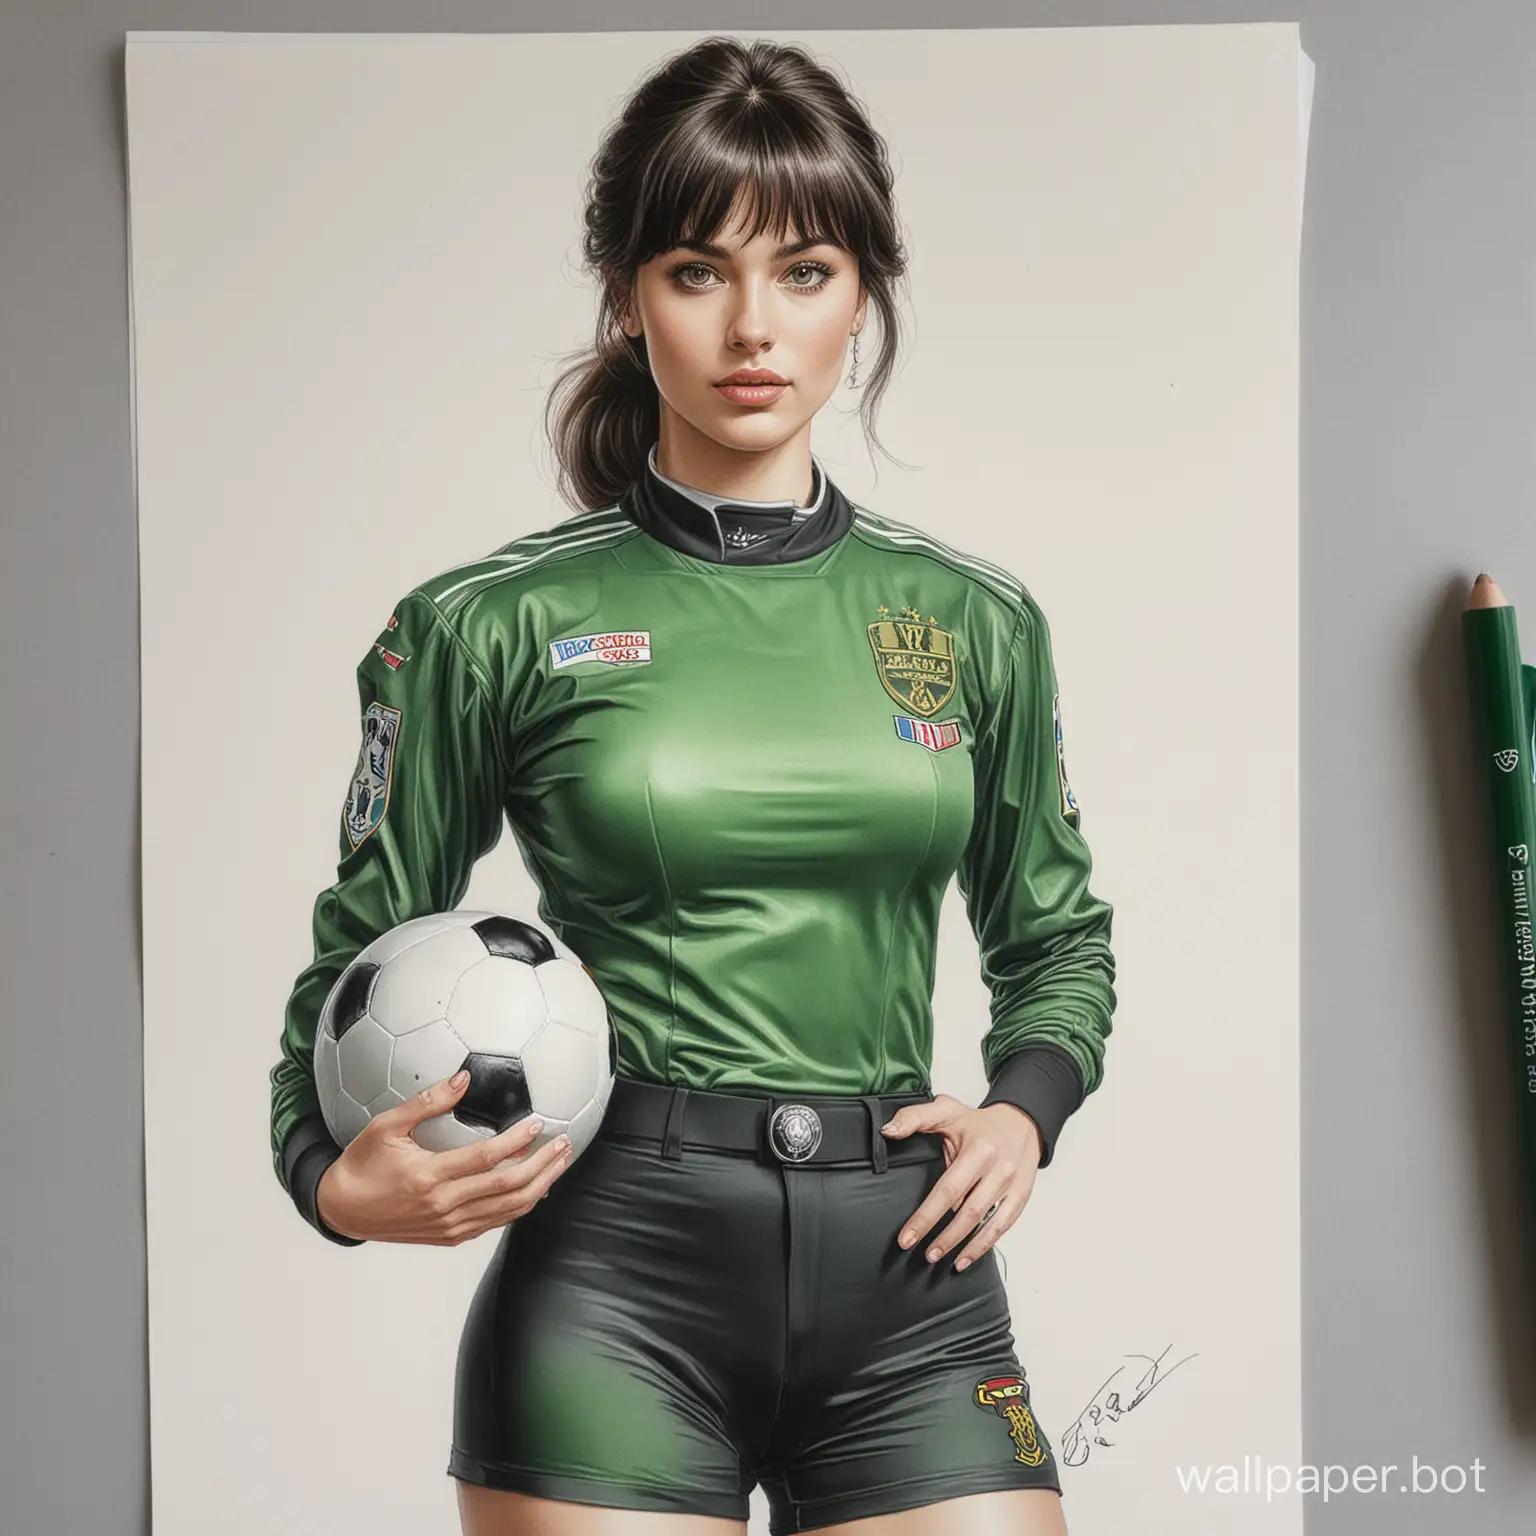 sketch young Olga Von Beisburg 26 years old dark hair with bangs 6 breast size narrow waist in green-black football uniform holding a big cup of champions white background high realism drawing with colored marker